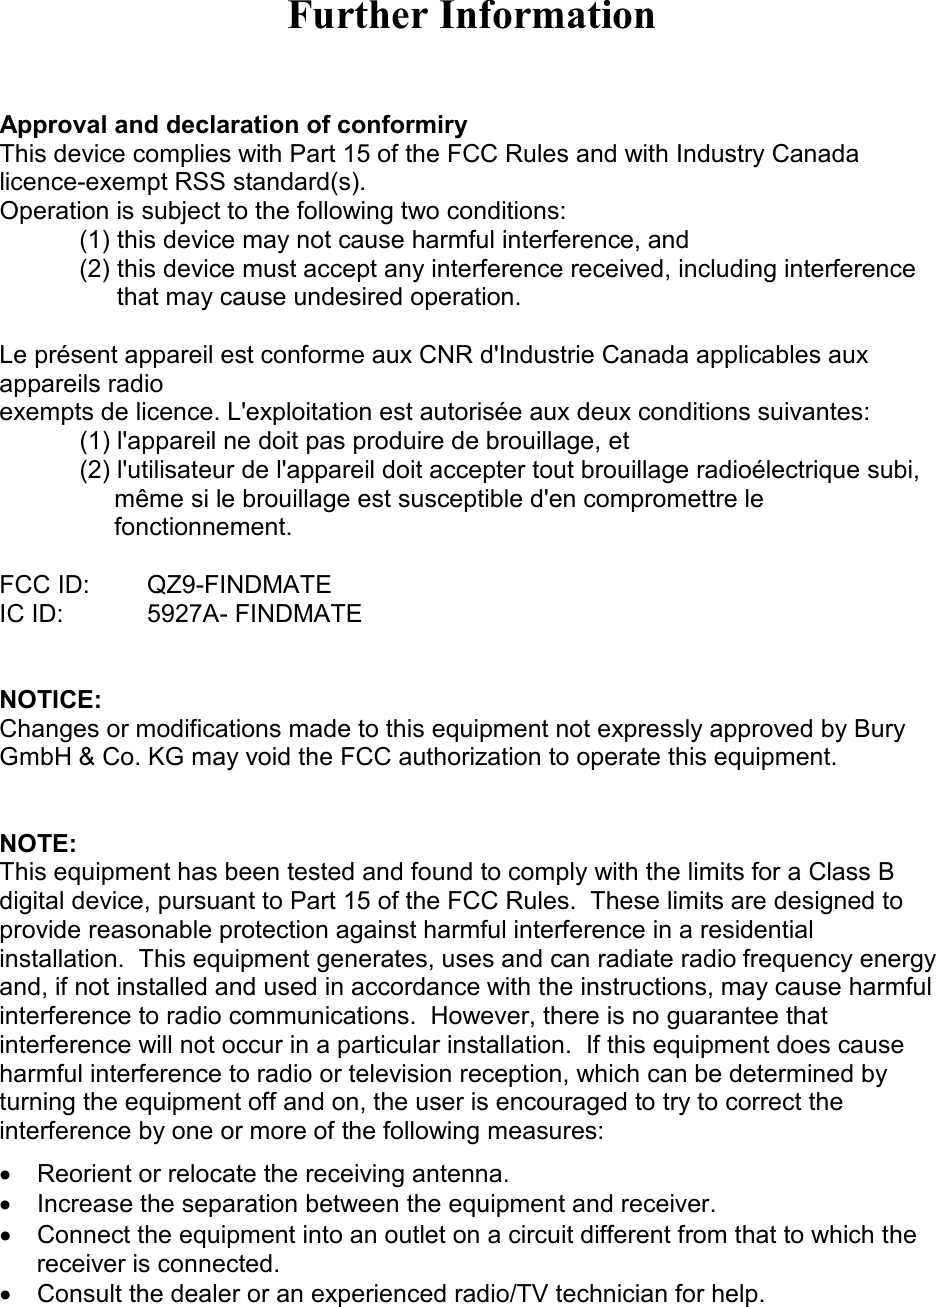 Further Information   Approval and declaration of conformiry This device complies with Part 15 of the FCC Rules and with Industry Canada licence-exempt RSS standard(s). Operation is subject to the following two conditions: (1) this device may not cause harmful interference, and  (2) this device must accept any interference received, including interference that may cause undesired operation.  Le présent appareil est conforme aux CNR d&apos;Industrie Canada applicables aux appareils radio exempts de licence. L&apos;exploitation est autorisée aux deux conditions suivantes: (1) l&apos;appareil ne doit pas produire de brouillage, et  (2) l&apos;utilisateur de l&apos;appareil doit accepter tout brouillage radioélectrique subi,      même si le brouillage est susceptible d&apos;en compromettre le      fonctionnement.  FCC ID:   QZ9-FINDMATE IC ID:    5927A- FINDMATE   NOTICE: Changes or modifications made to this equipment not expressly approved by Bury GmbH &amp; Co. KG may void the FCC authorization to operate this equipment.   NOTE:  This equipment has been tested and found to comply with the limits for a Class B digital device, pursuant to Part 15 of the FCC Rules.  These limits are designed to provide reasonable protection against harmful interference in a residential installation.  This equipment generates, uses and can radiate radio frequency energy and, if not installed and used in accordance with the instructions, may cause harmful interference to radio communications.  However, there is no guarantee that interference will not occur in a particular installation.  If this equipment does cause harmful interference to radio or television reception, which can be determined by turning the equipment off and on, the user is encouraged to try to correct the interference by one or more of the following measures: •  Reorient or relocate the receiving antenna. •  Increase the separation between the equipment and receiver. •  Connect the equipment into an outlet on a circuit different from that to which the receiver is connected. •  Consult the dealer or an experienced radio/TV technician for help.   